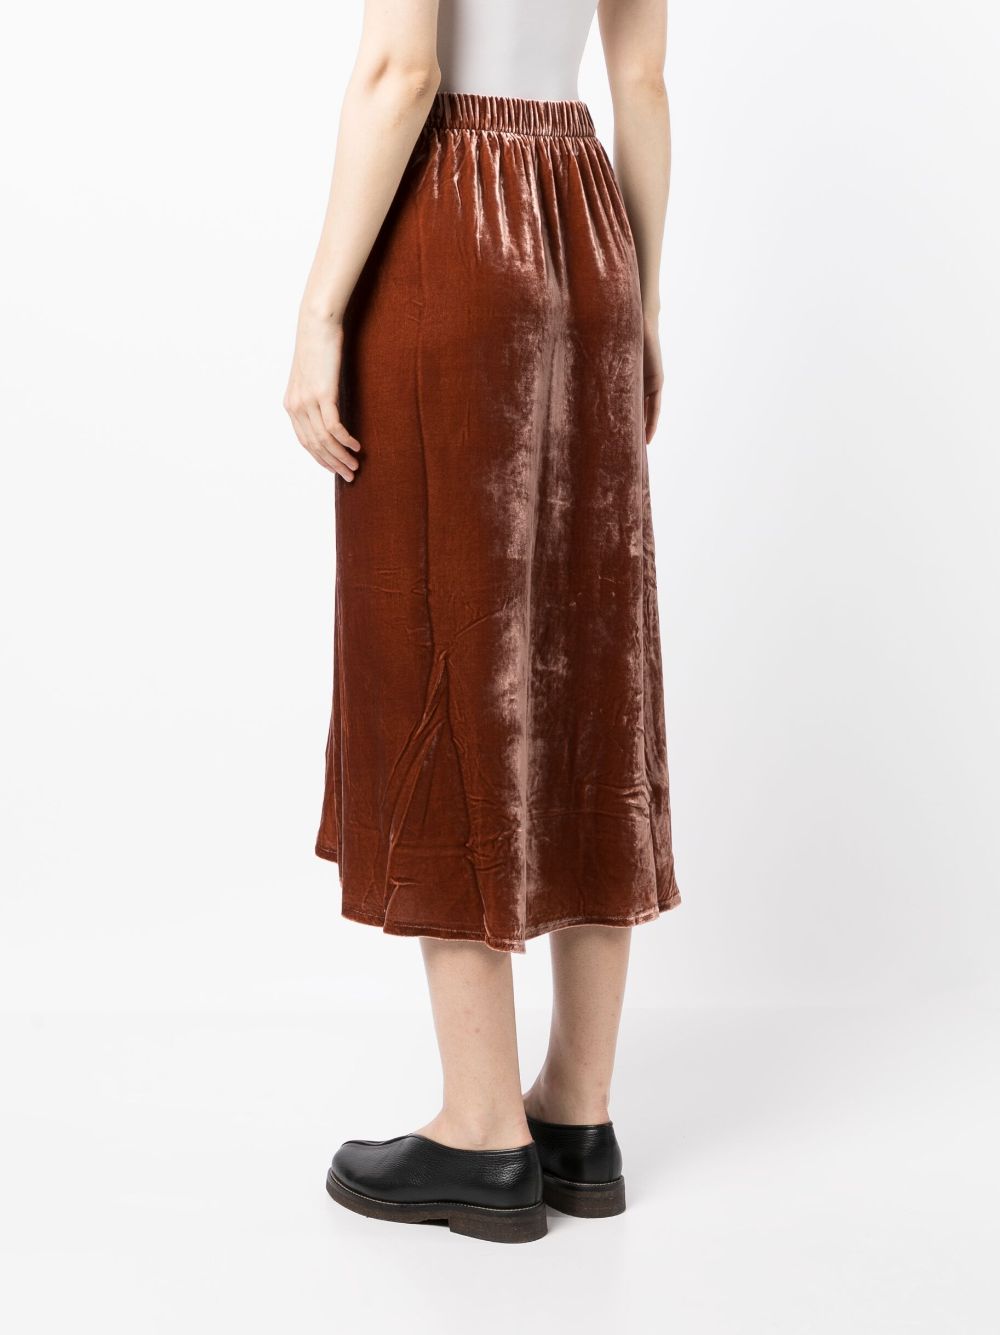 Eileen Fisher Quilted A-Line Silk Midi Skirt